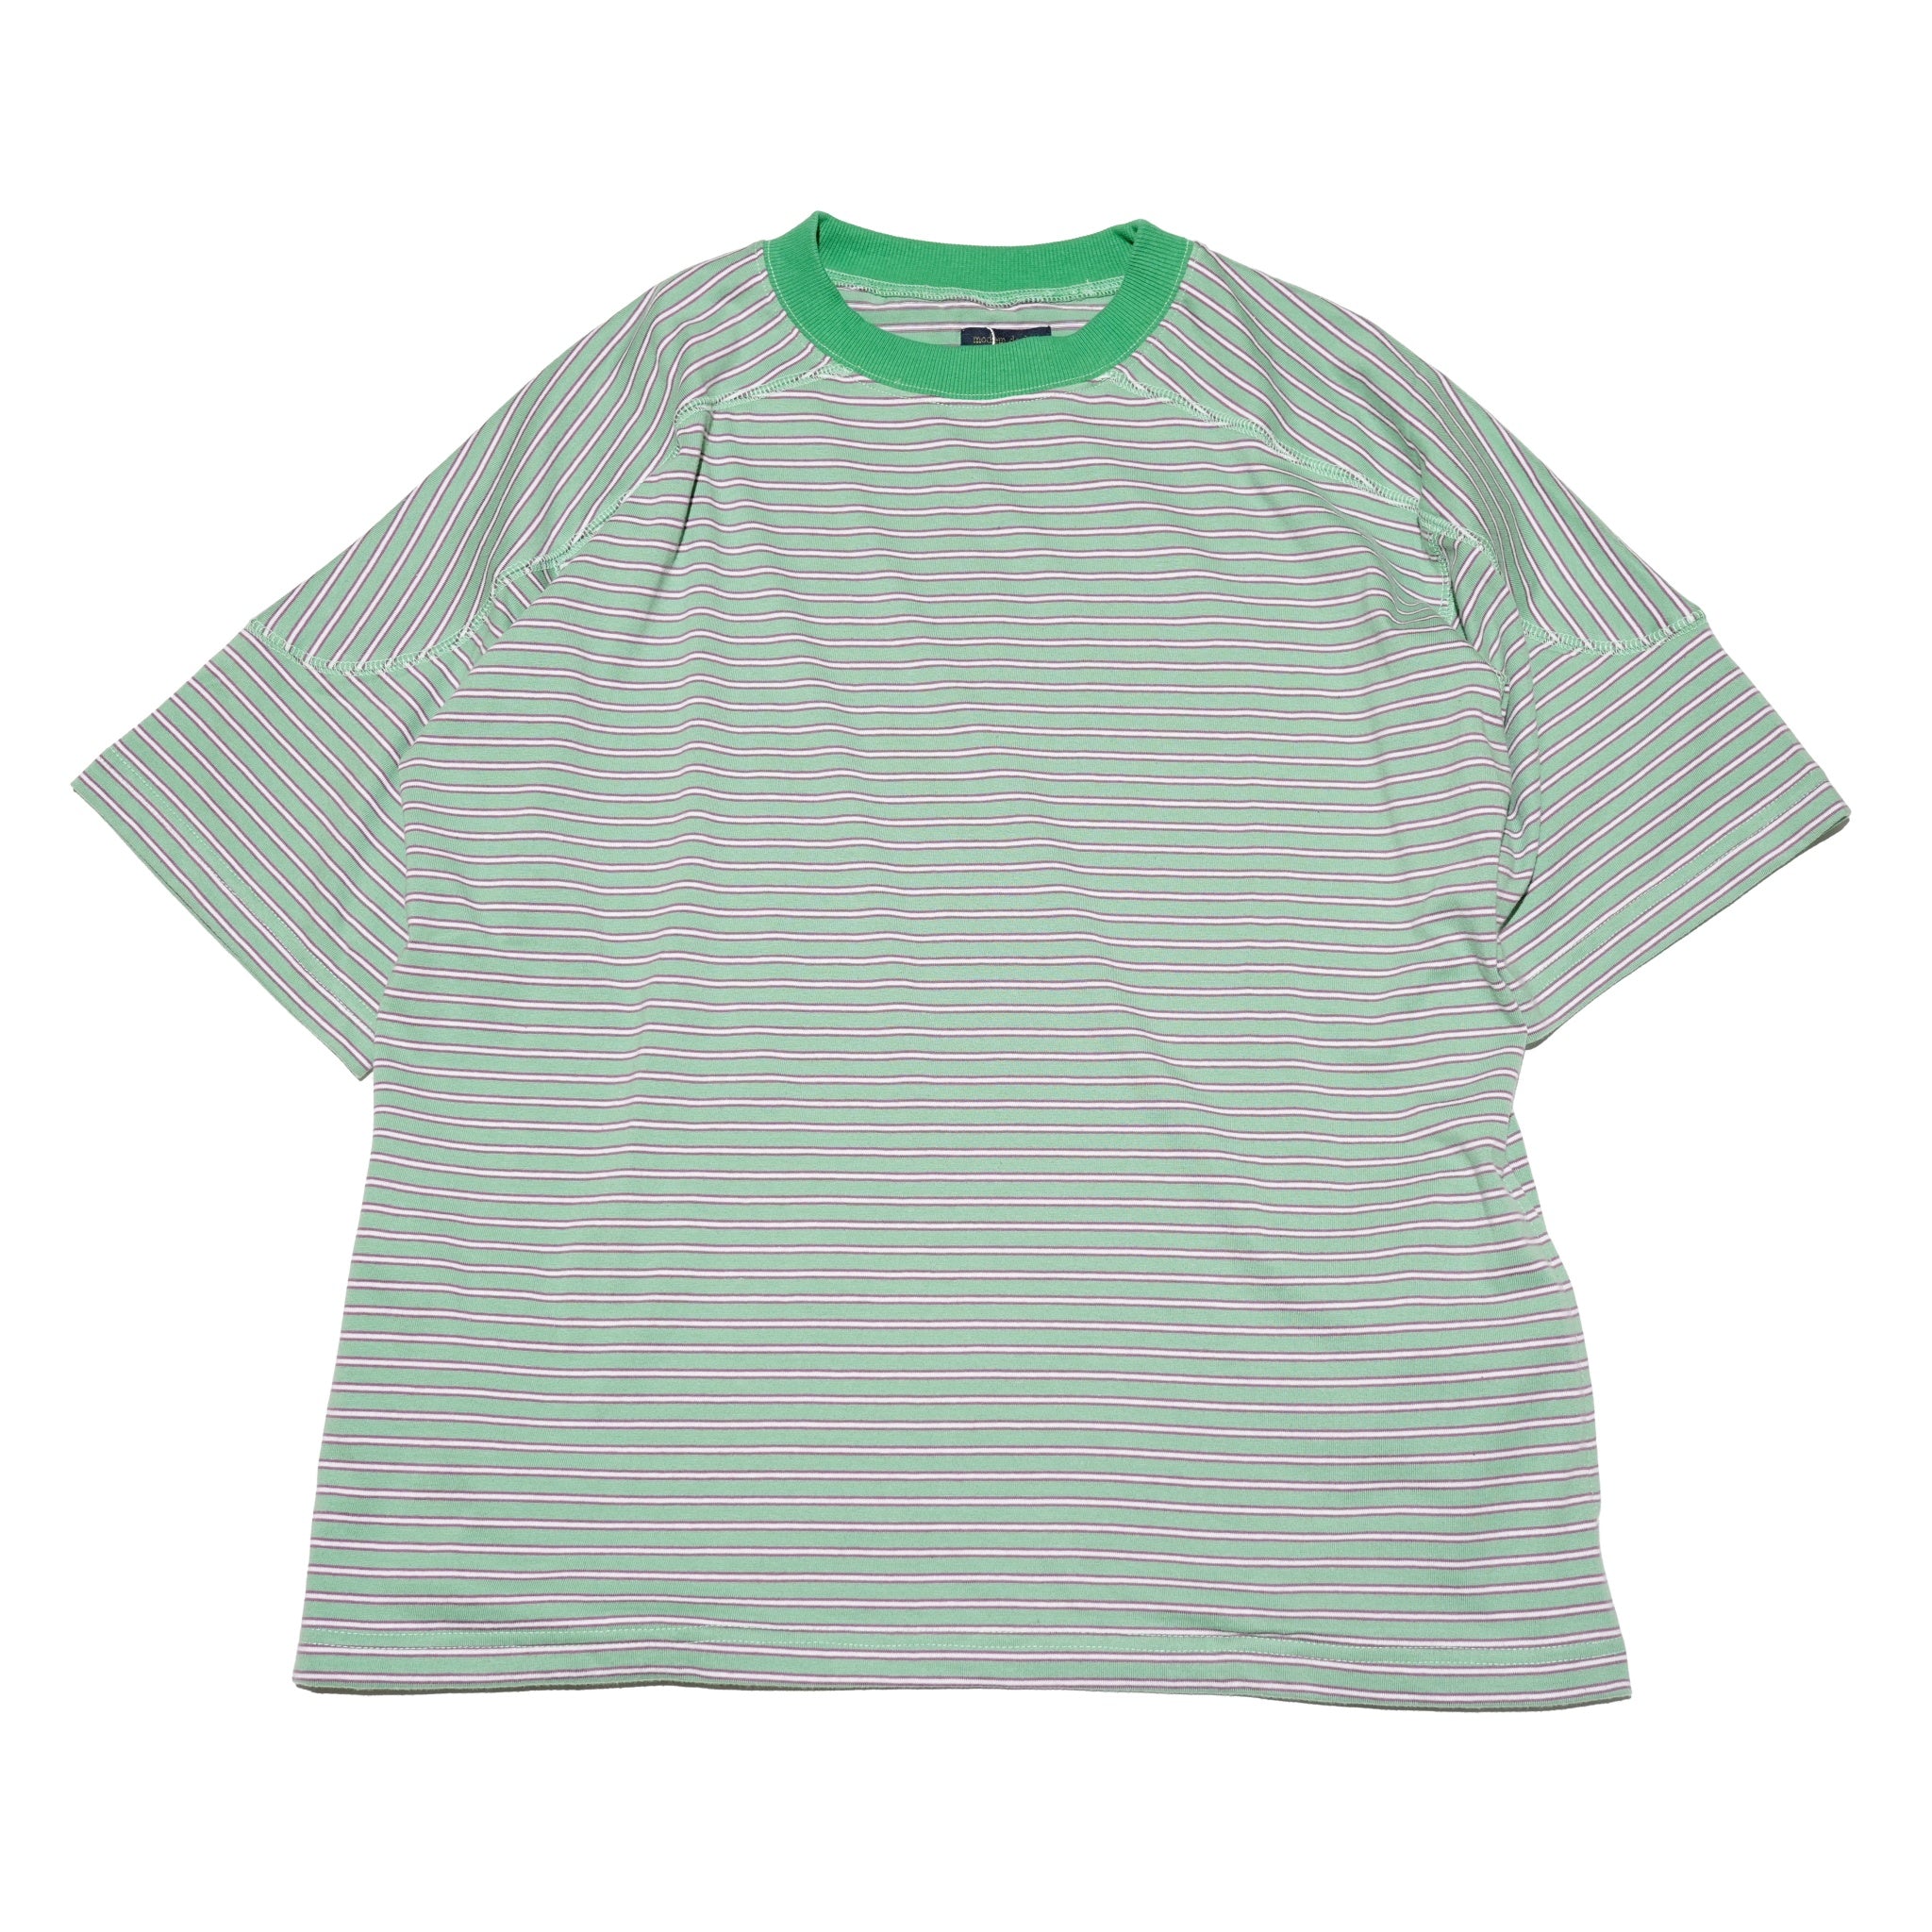 No:M-2301251 | Name:Multi Striped Cut and Sew | Color:Green/Black【MODEM DESIGN_モデムデザイン】